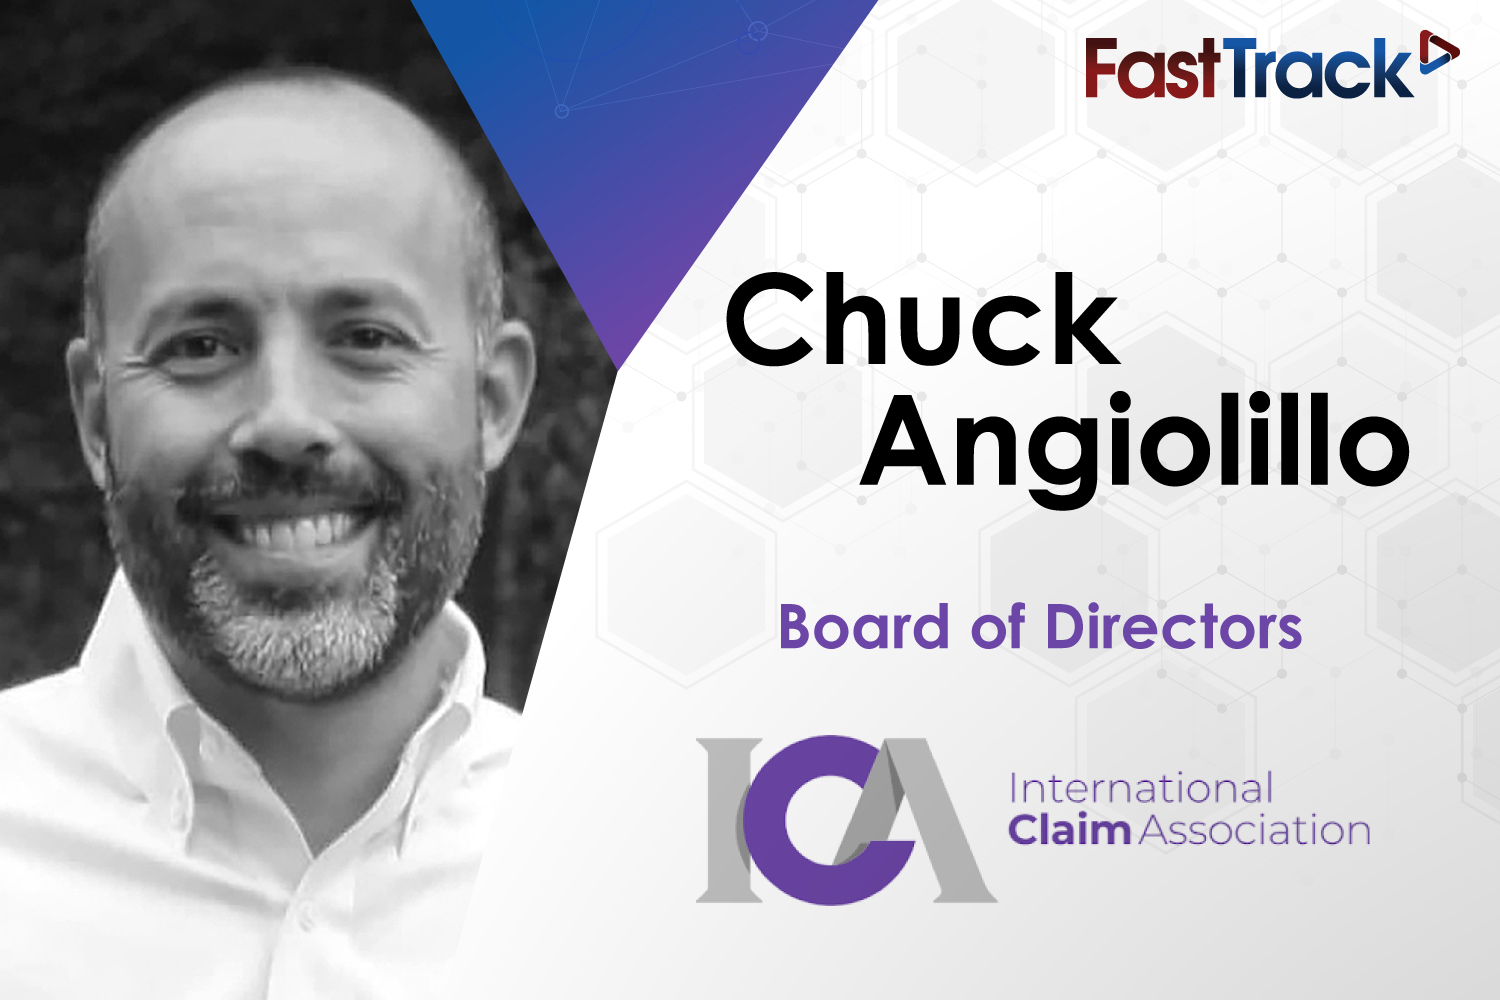 Chuck Angiolillo is appointed to the Board of Directors of the International Claim Association (ICA)